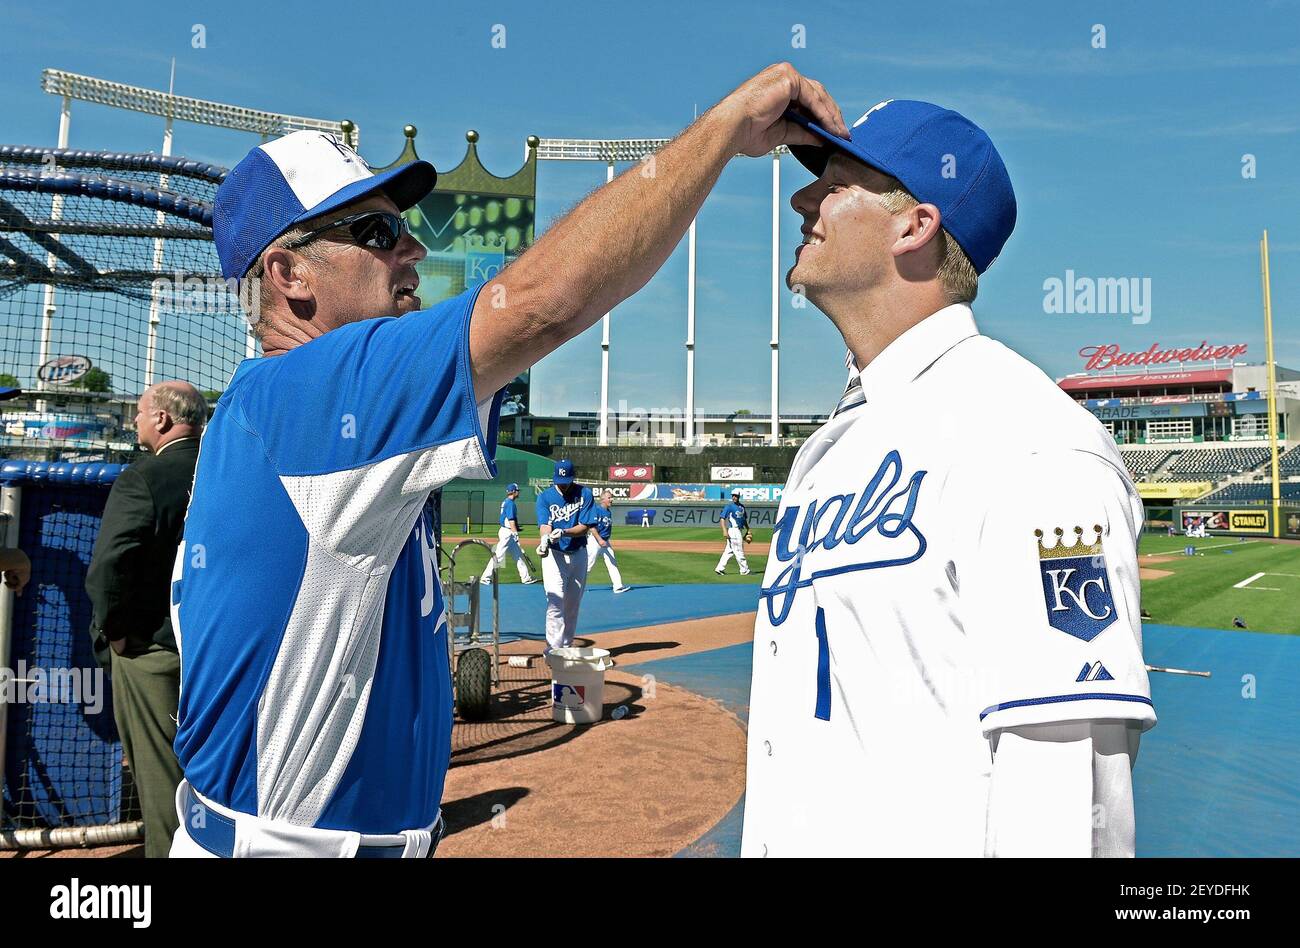 Kansas City Royals hitting coach George Brett (5) checked to see how tall  the teams first round draft pick Hunter Dozier was, after he signed and  watched batting practice before Monday's baseball